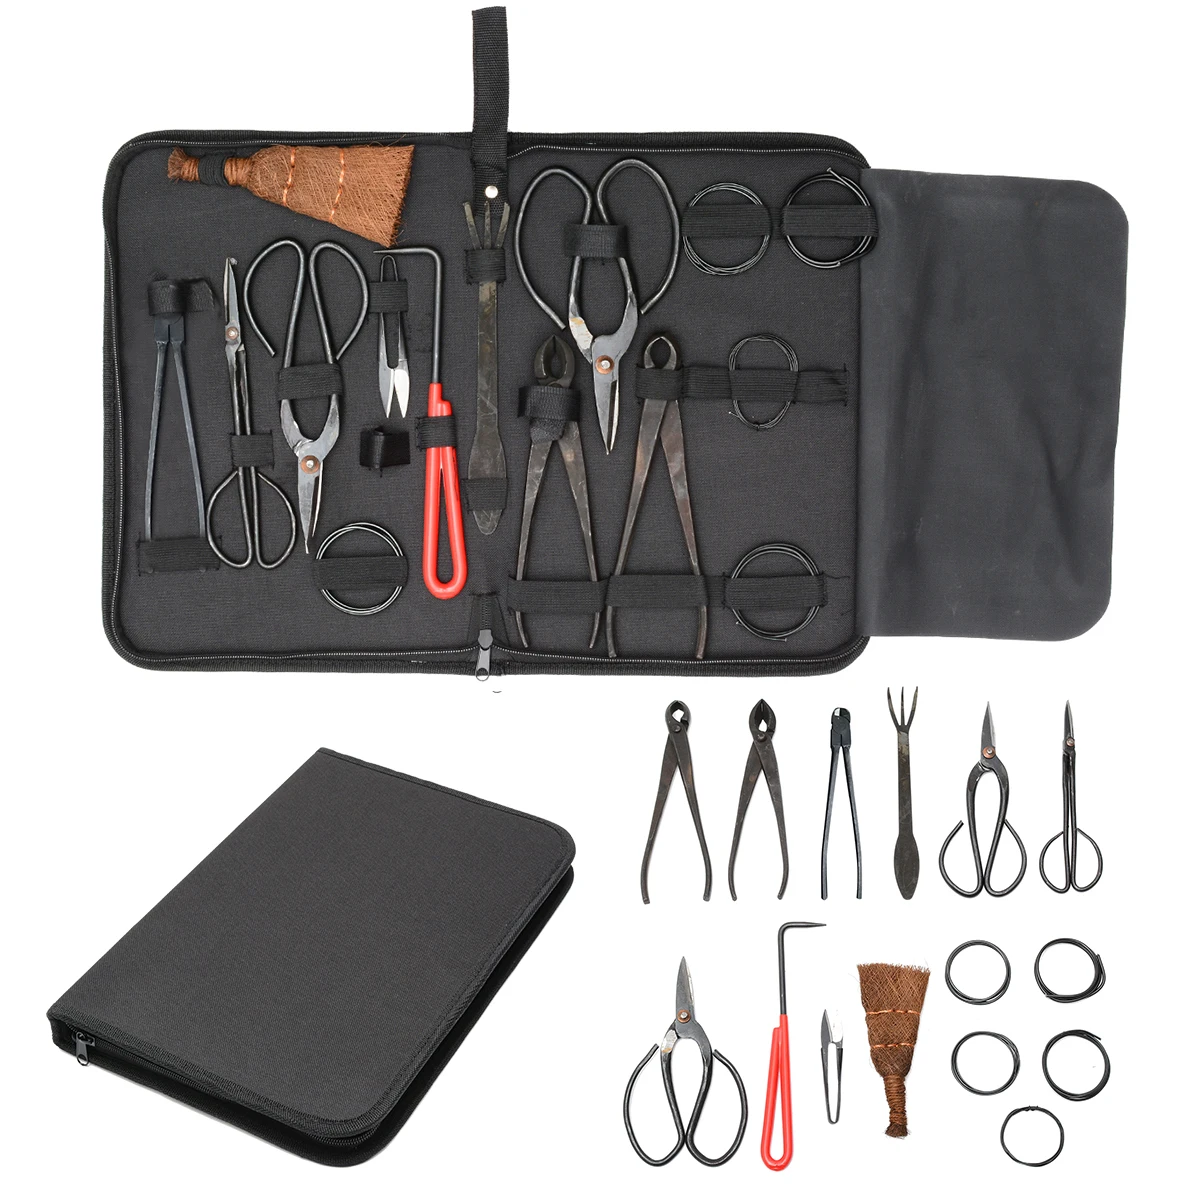 Carbon Steel Bonsai Tool Set Garden Plants Trimming Scissors Extensive Cutter Shears Kit With Nylon Case For Horticulture Tools